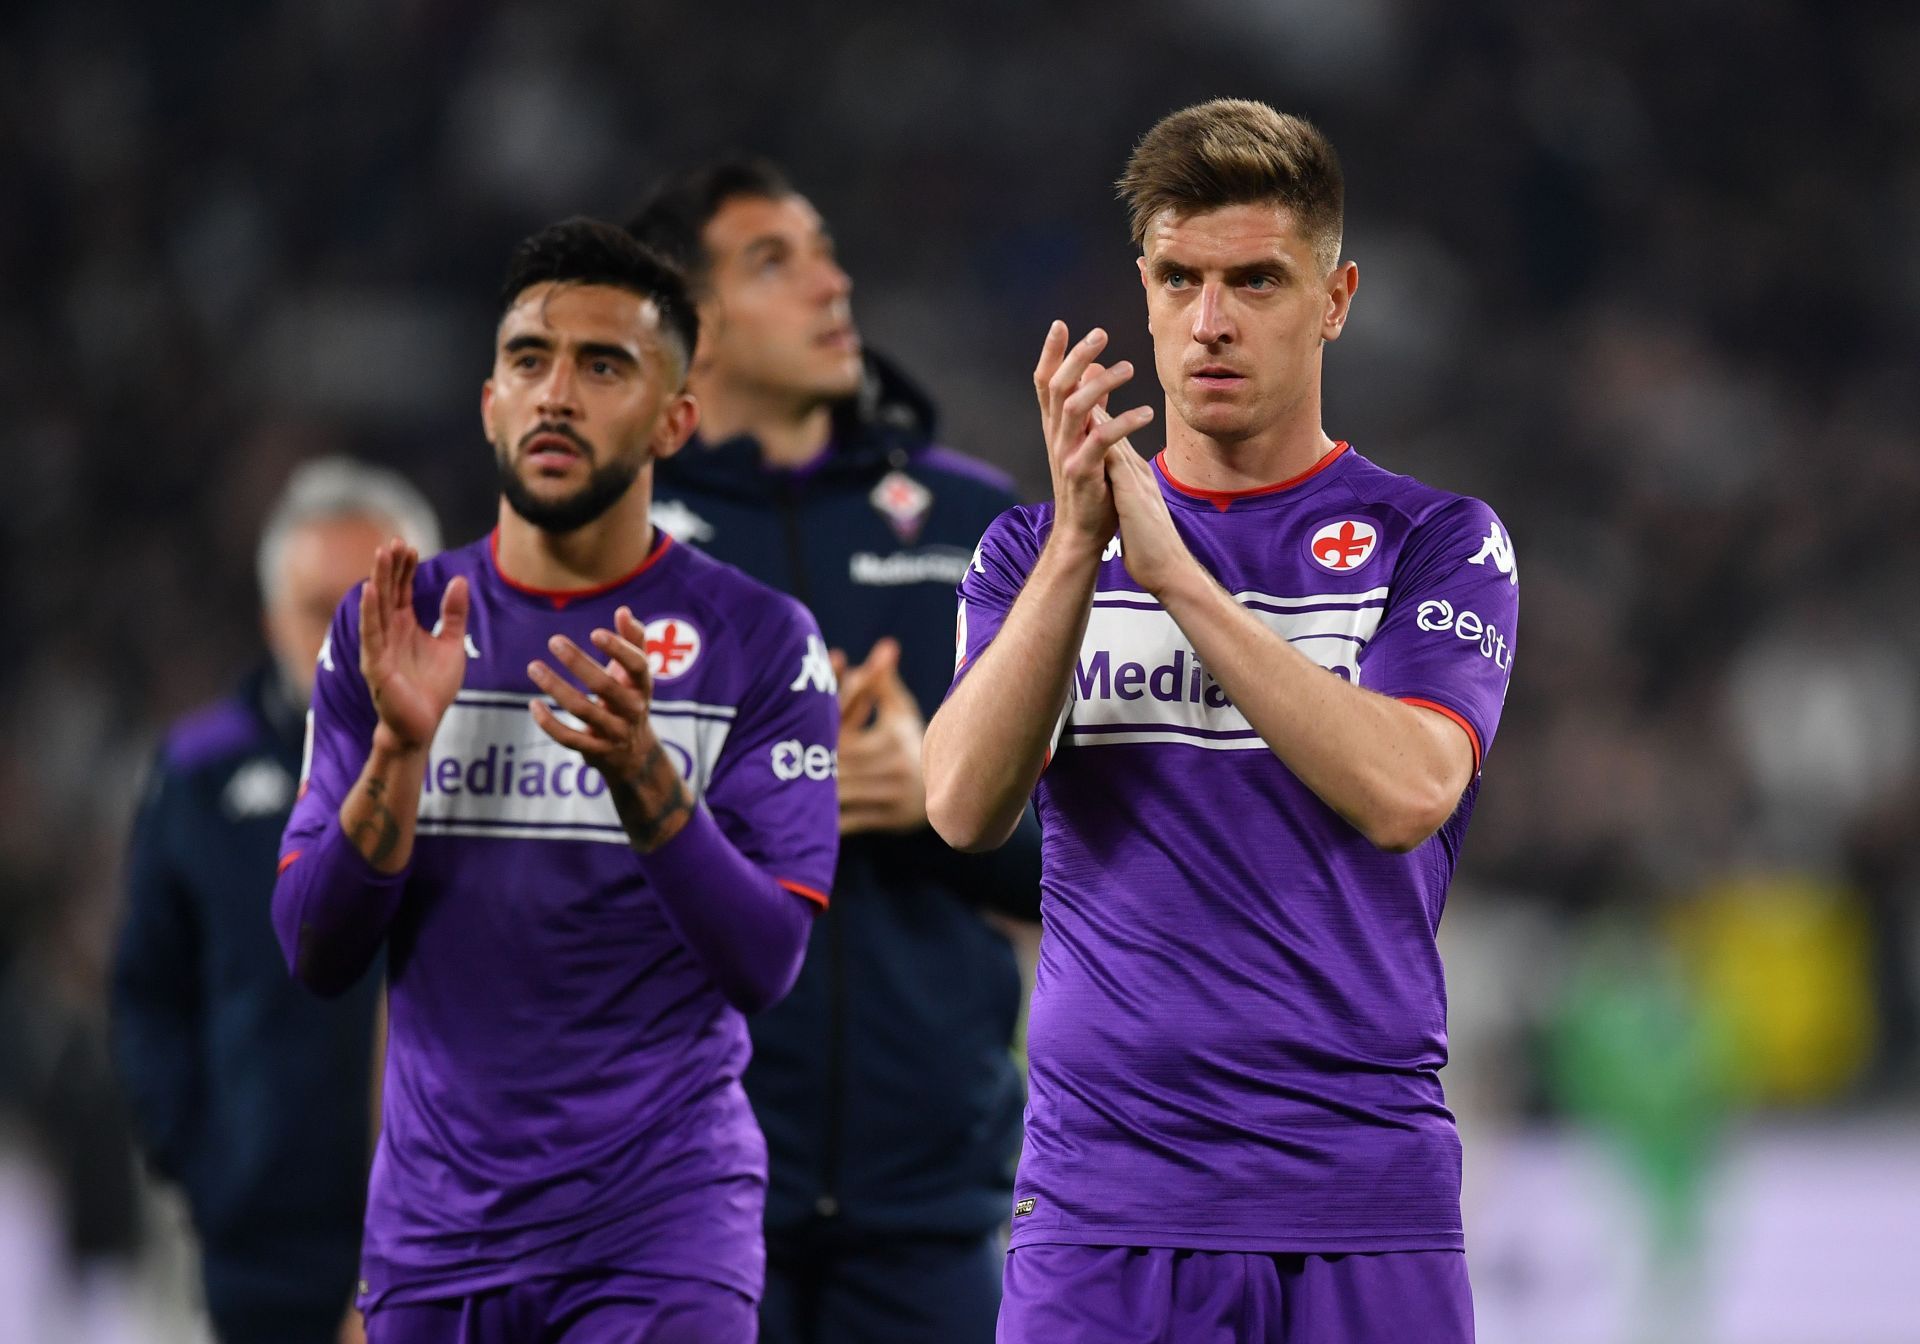 Fiorentina and Twente lock horns in their Conference League qualifying fixture on Thursday